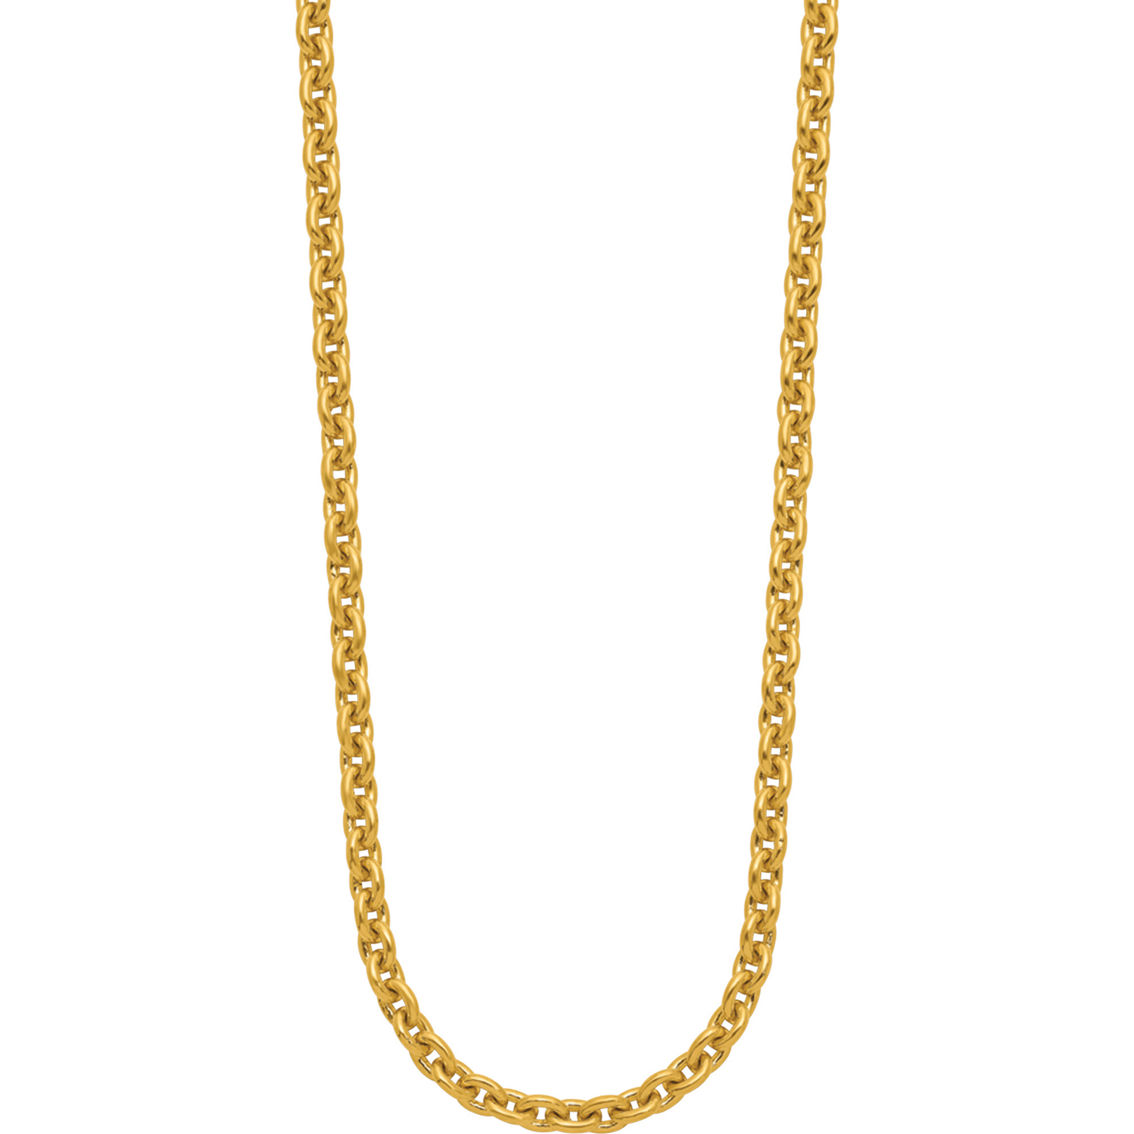 24K Pure Gold 24K Yellow Gold 5.4mm Solid Open Oval Link 20 in. Chain - Image 3 of 5